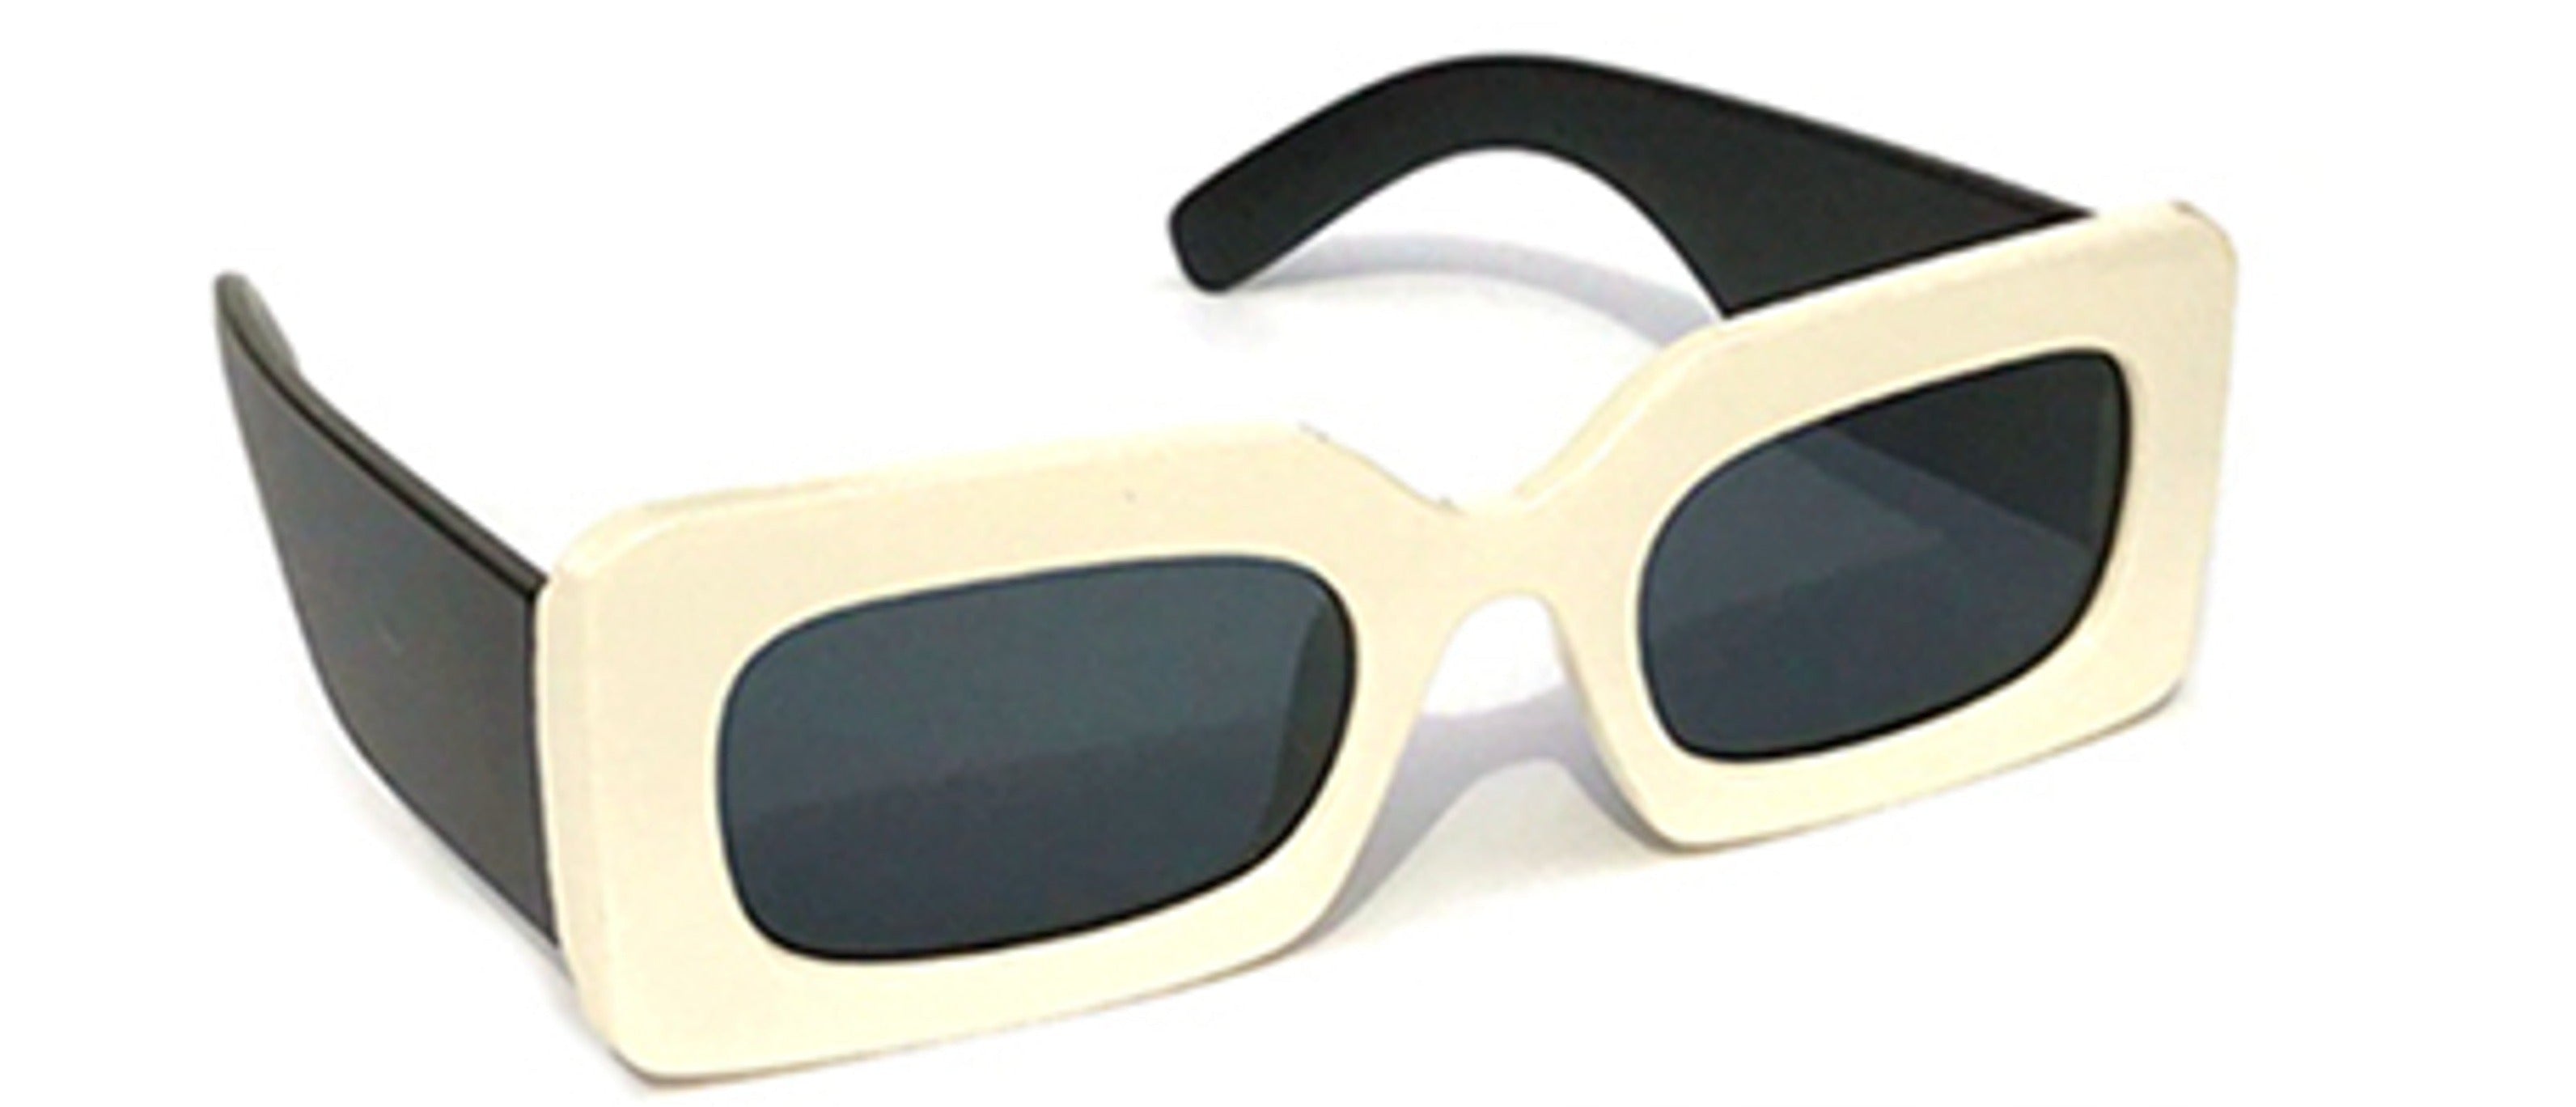 Ivory - Modern Rounded Square Chic Sunglasses - Sunglasses at TFC&H Co.